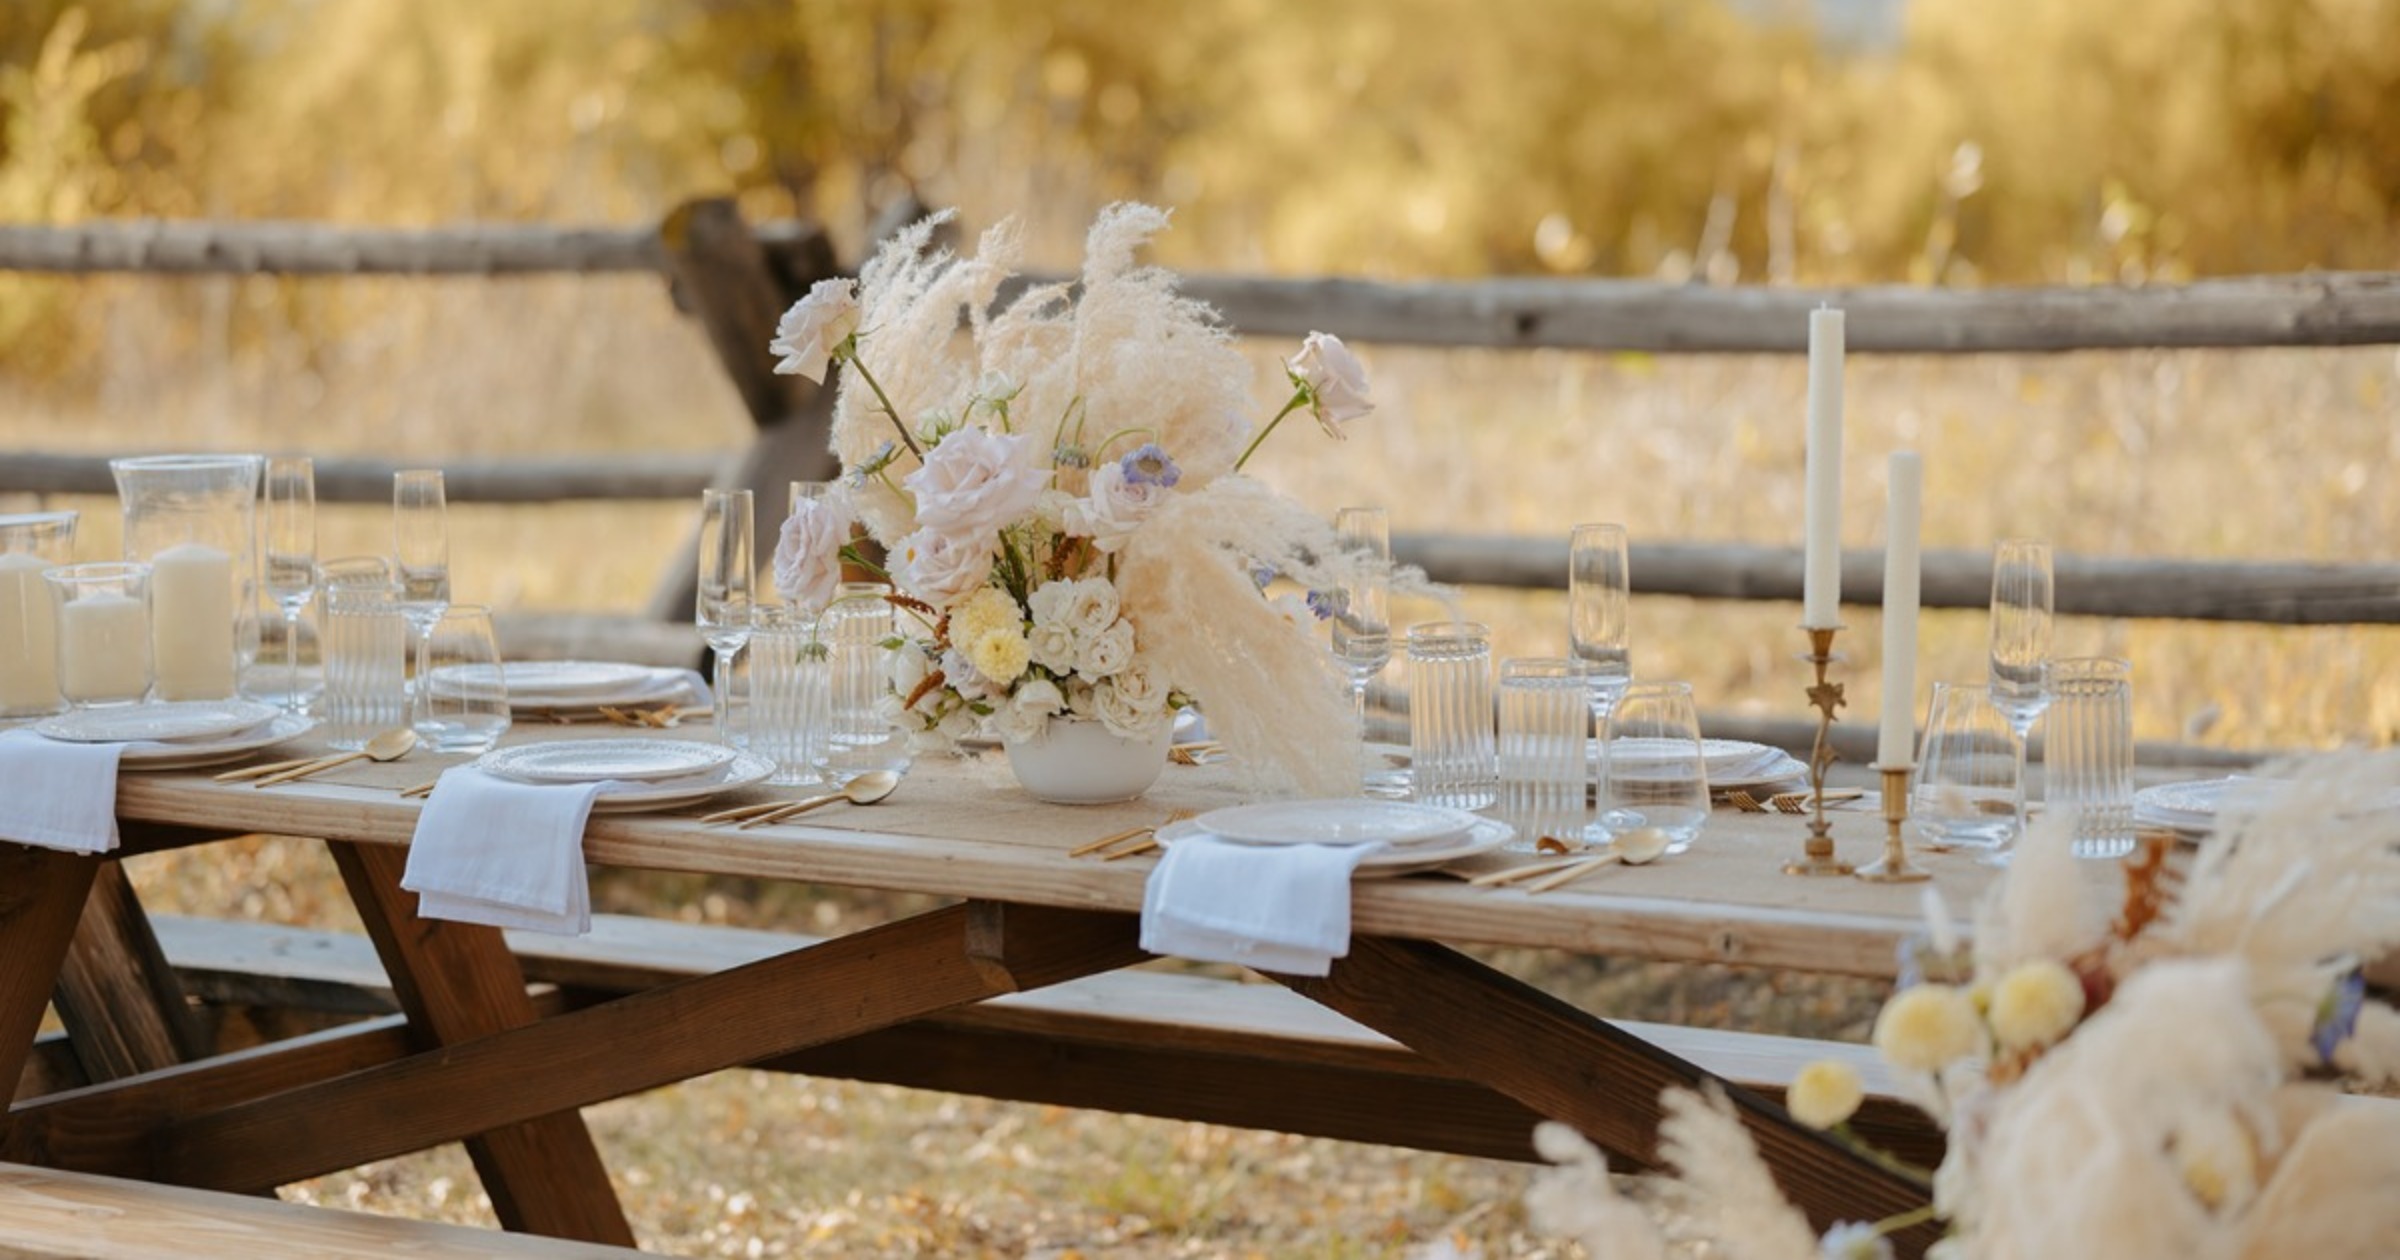 An Intimate and Cozy Fall Wedding in the Teton Mountains for 50K